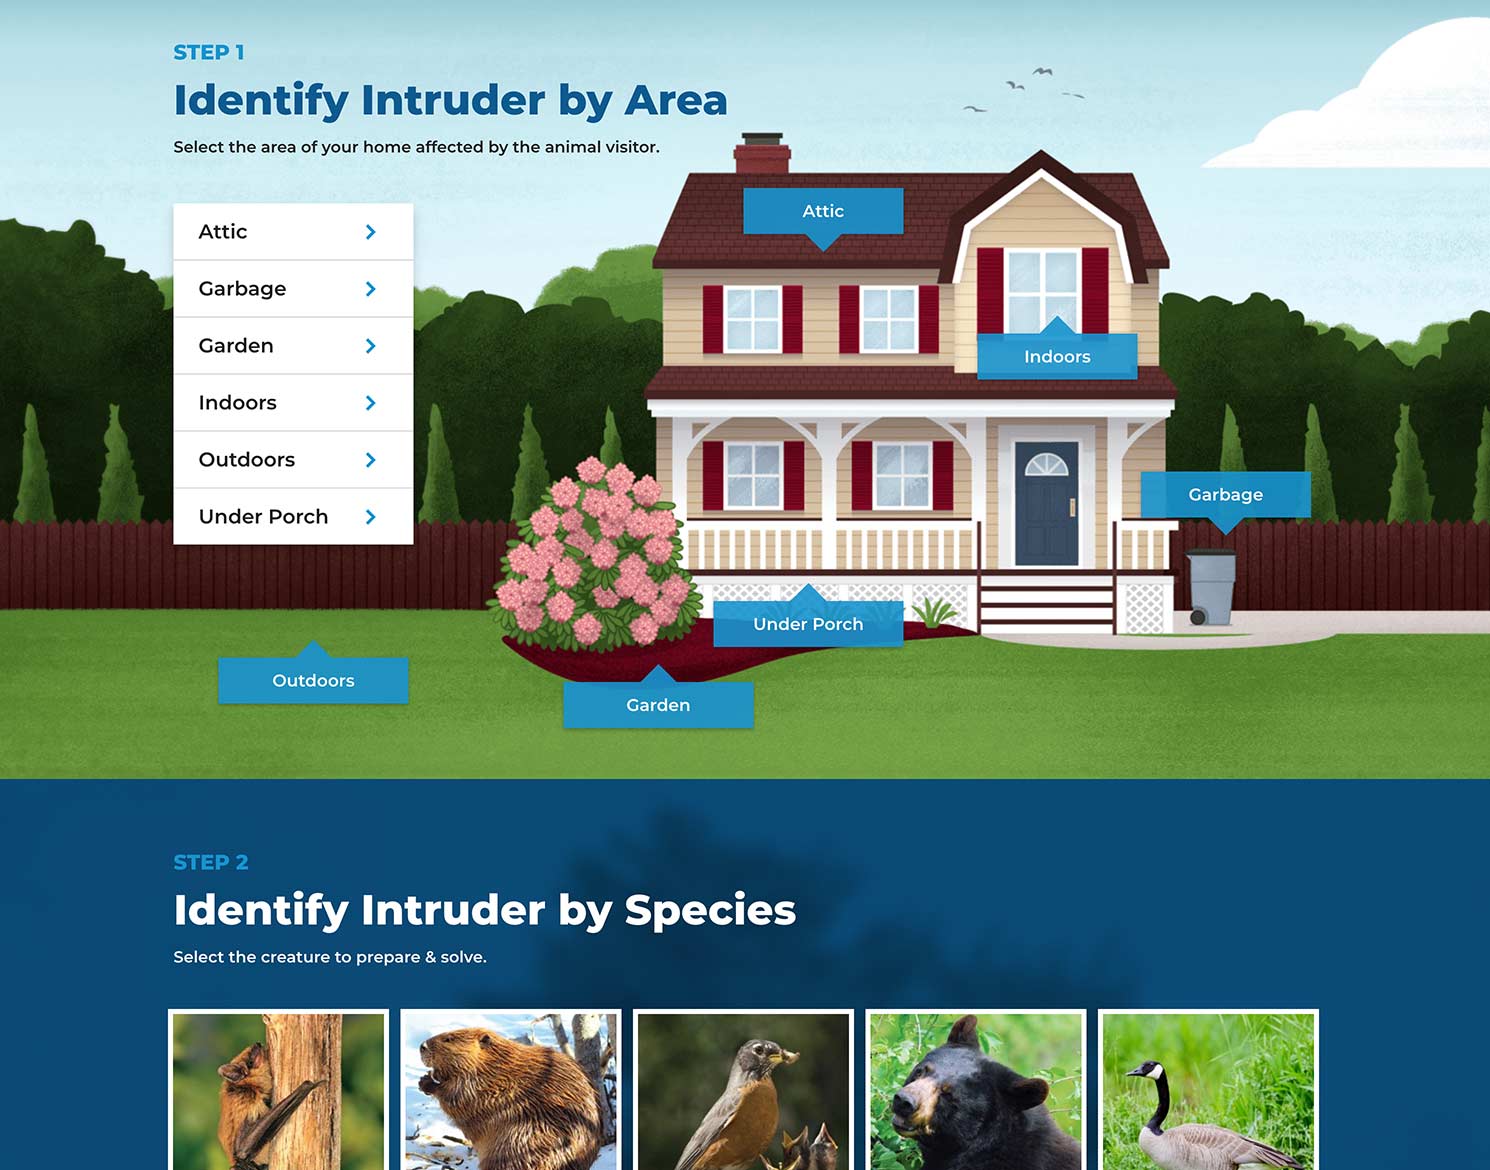 Intruder Excluder website with illustration of home and various types of species who can intrude homes